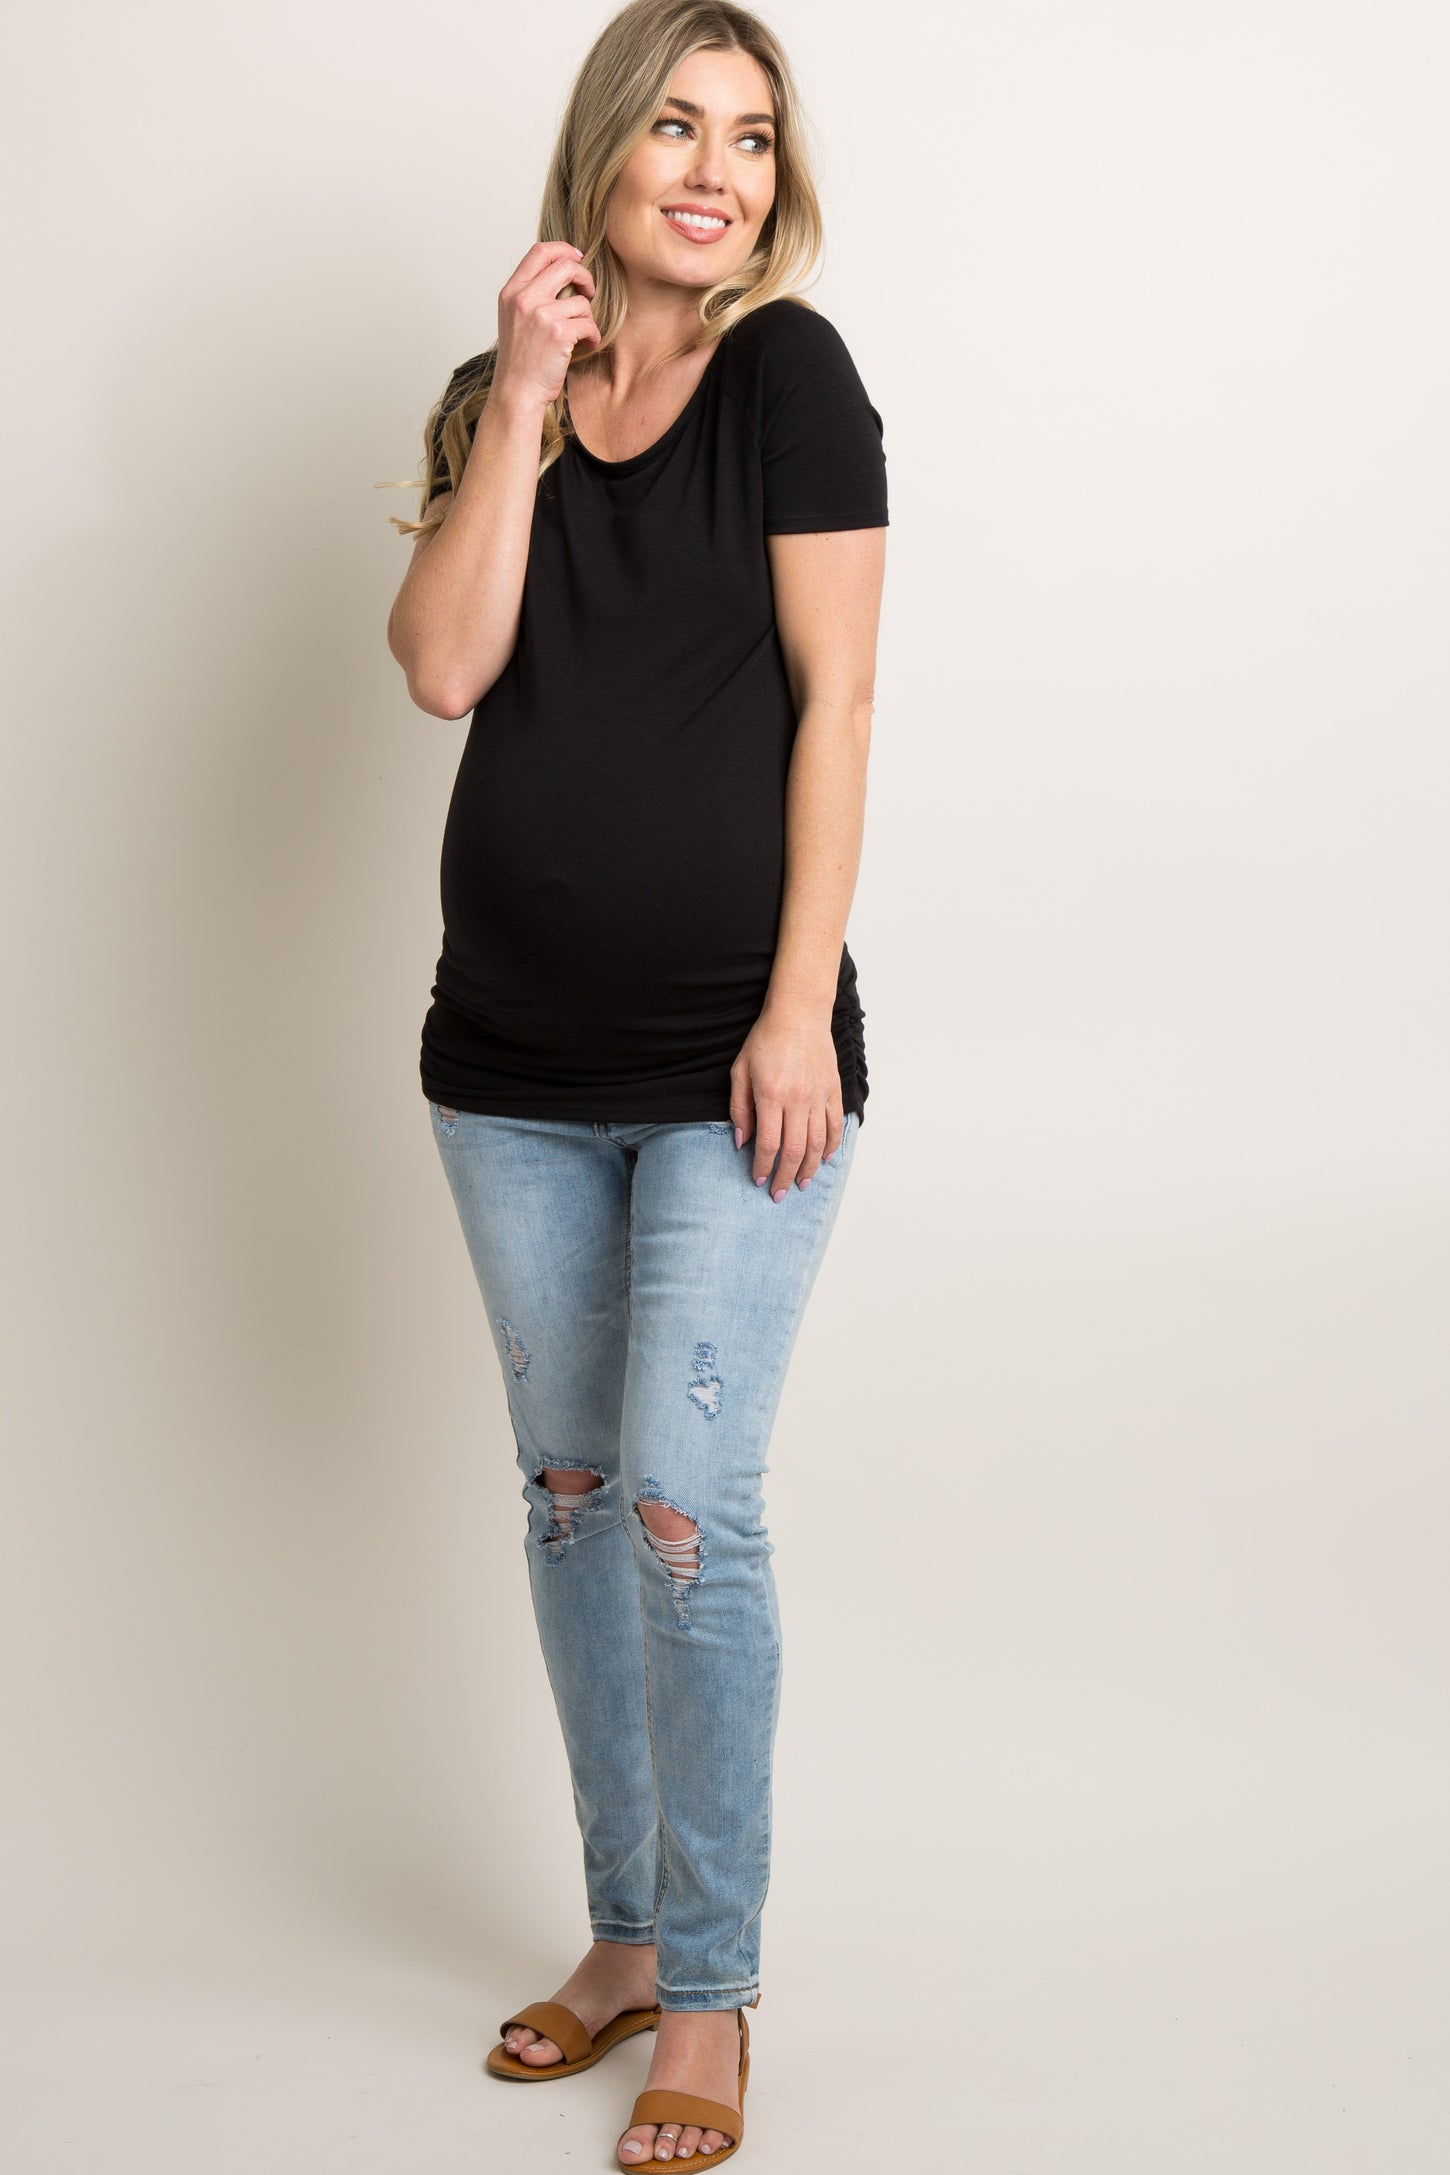 PinkBlush Black Basic Fitted Short Sleeve Maternity Top